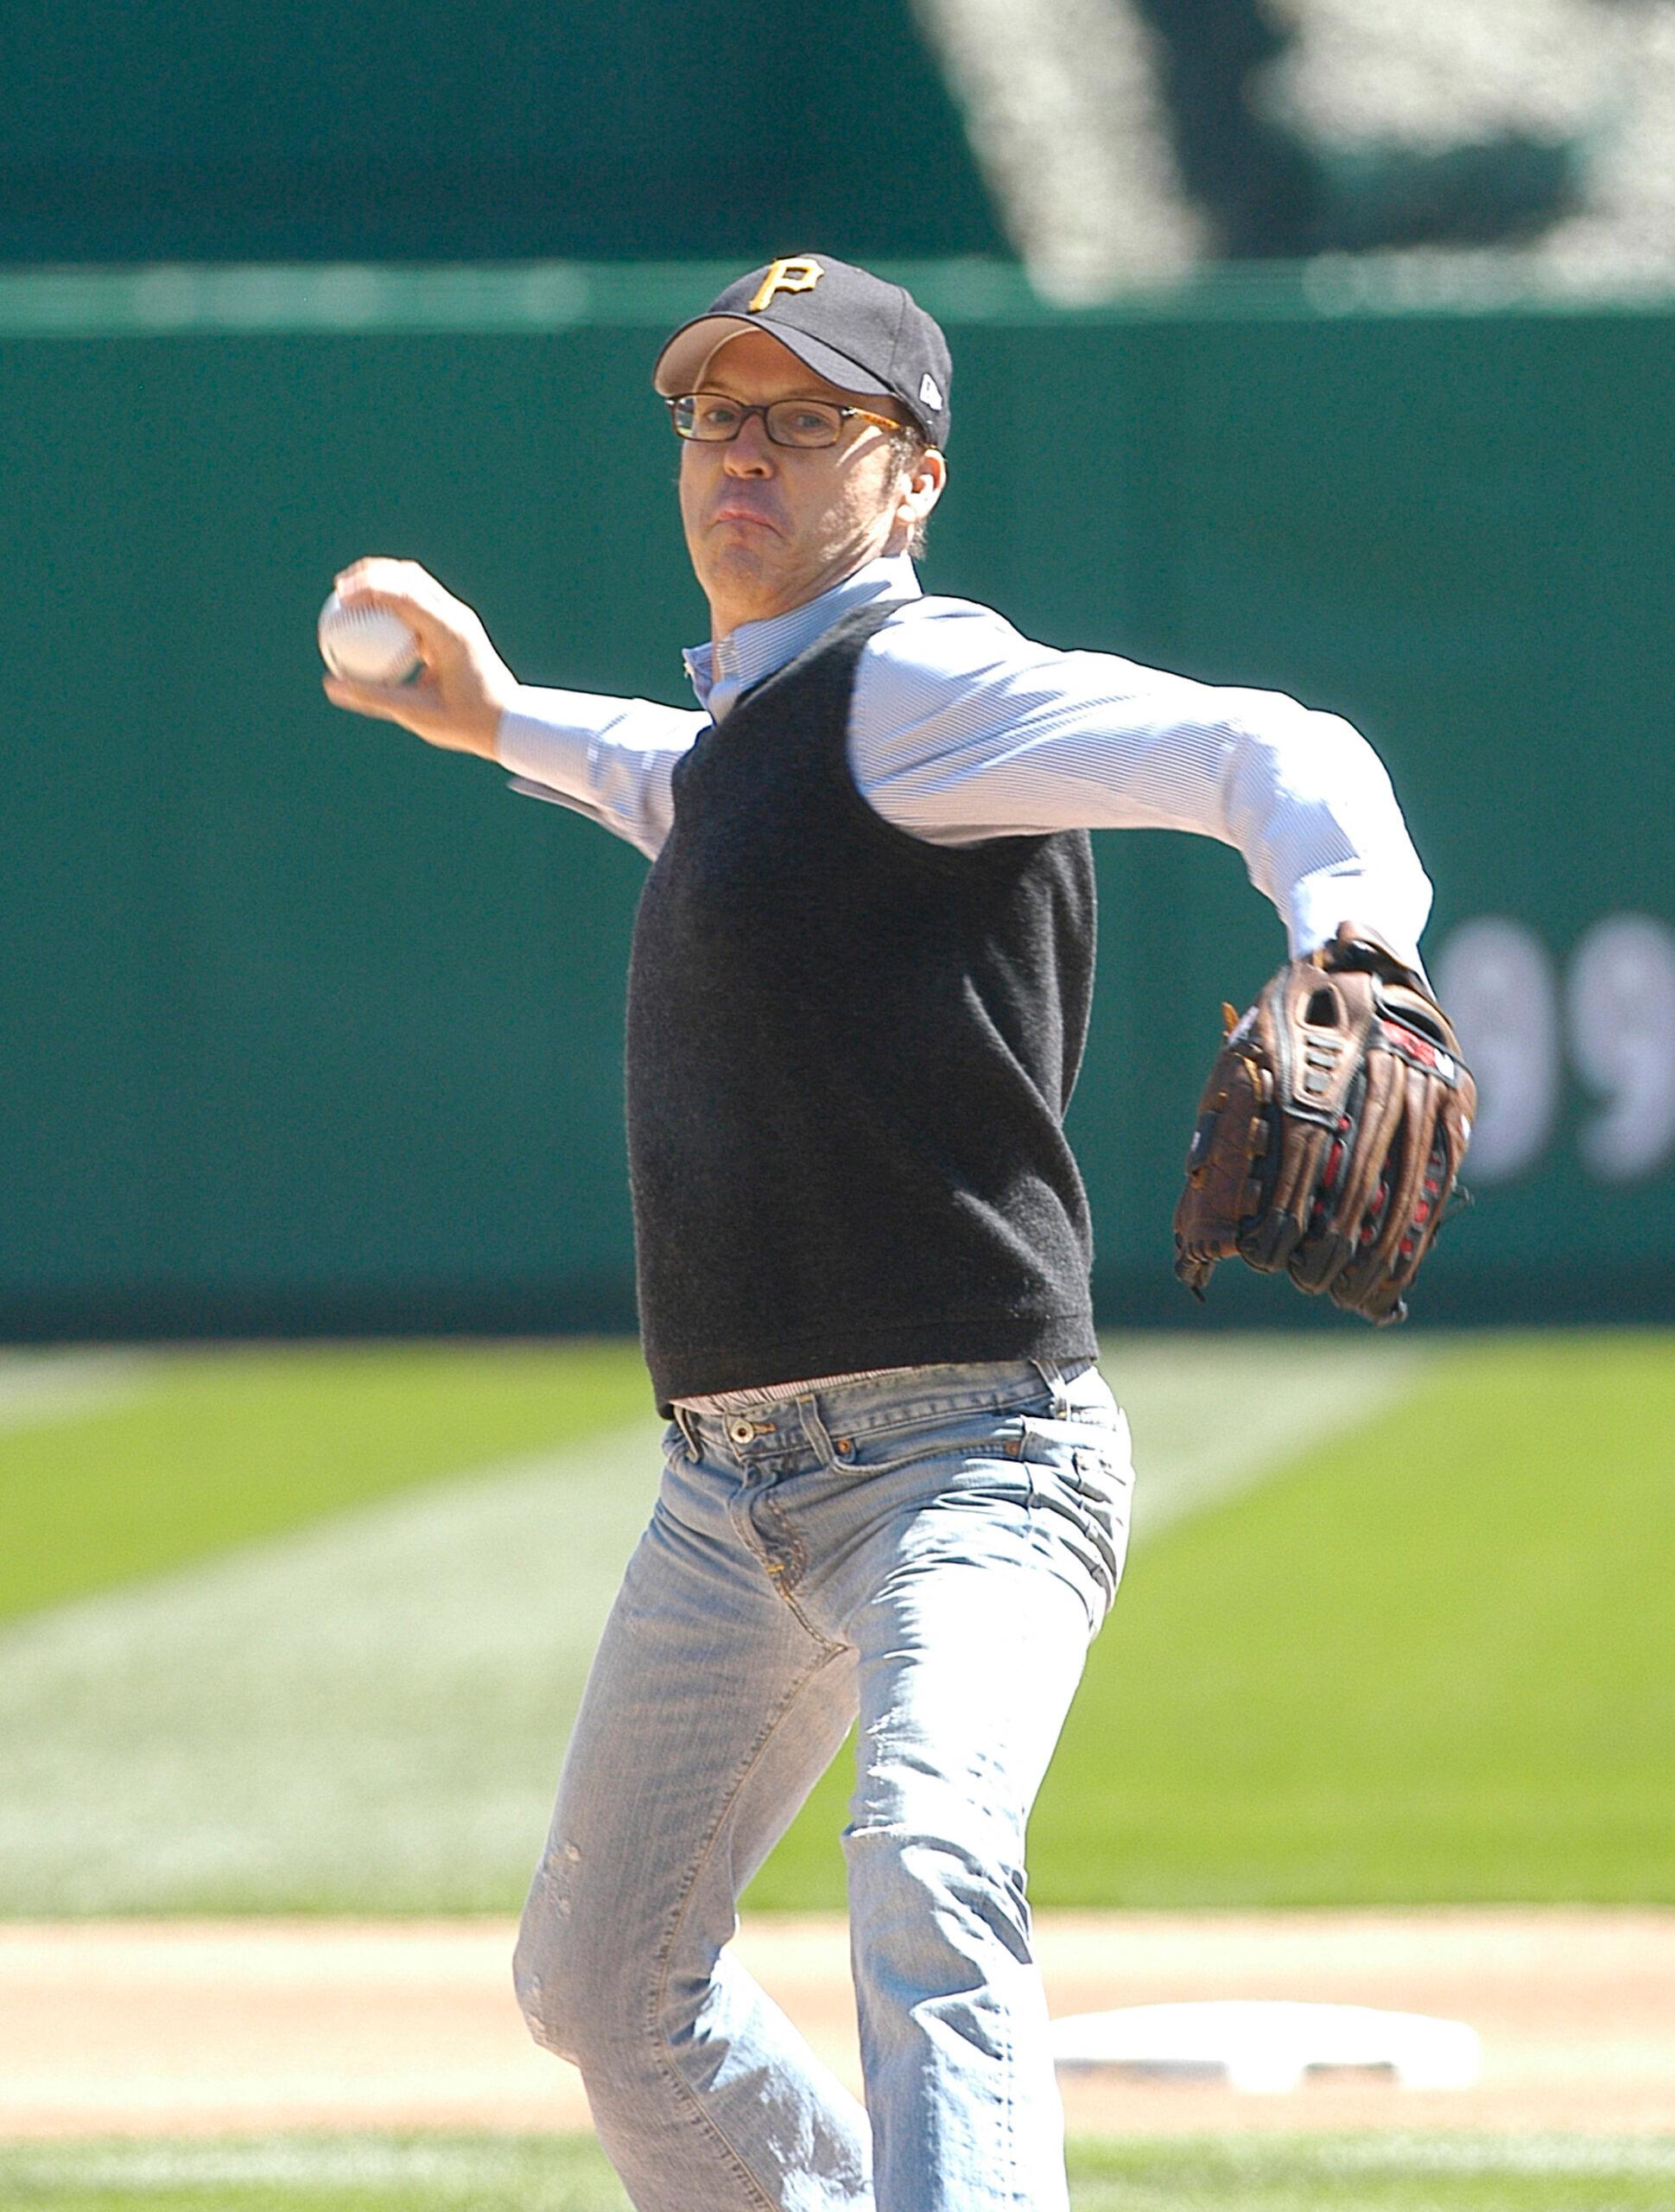 A photo of Michael Keaton on a field about to throw a ball.